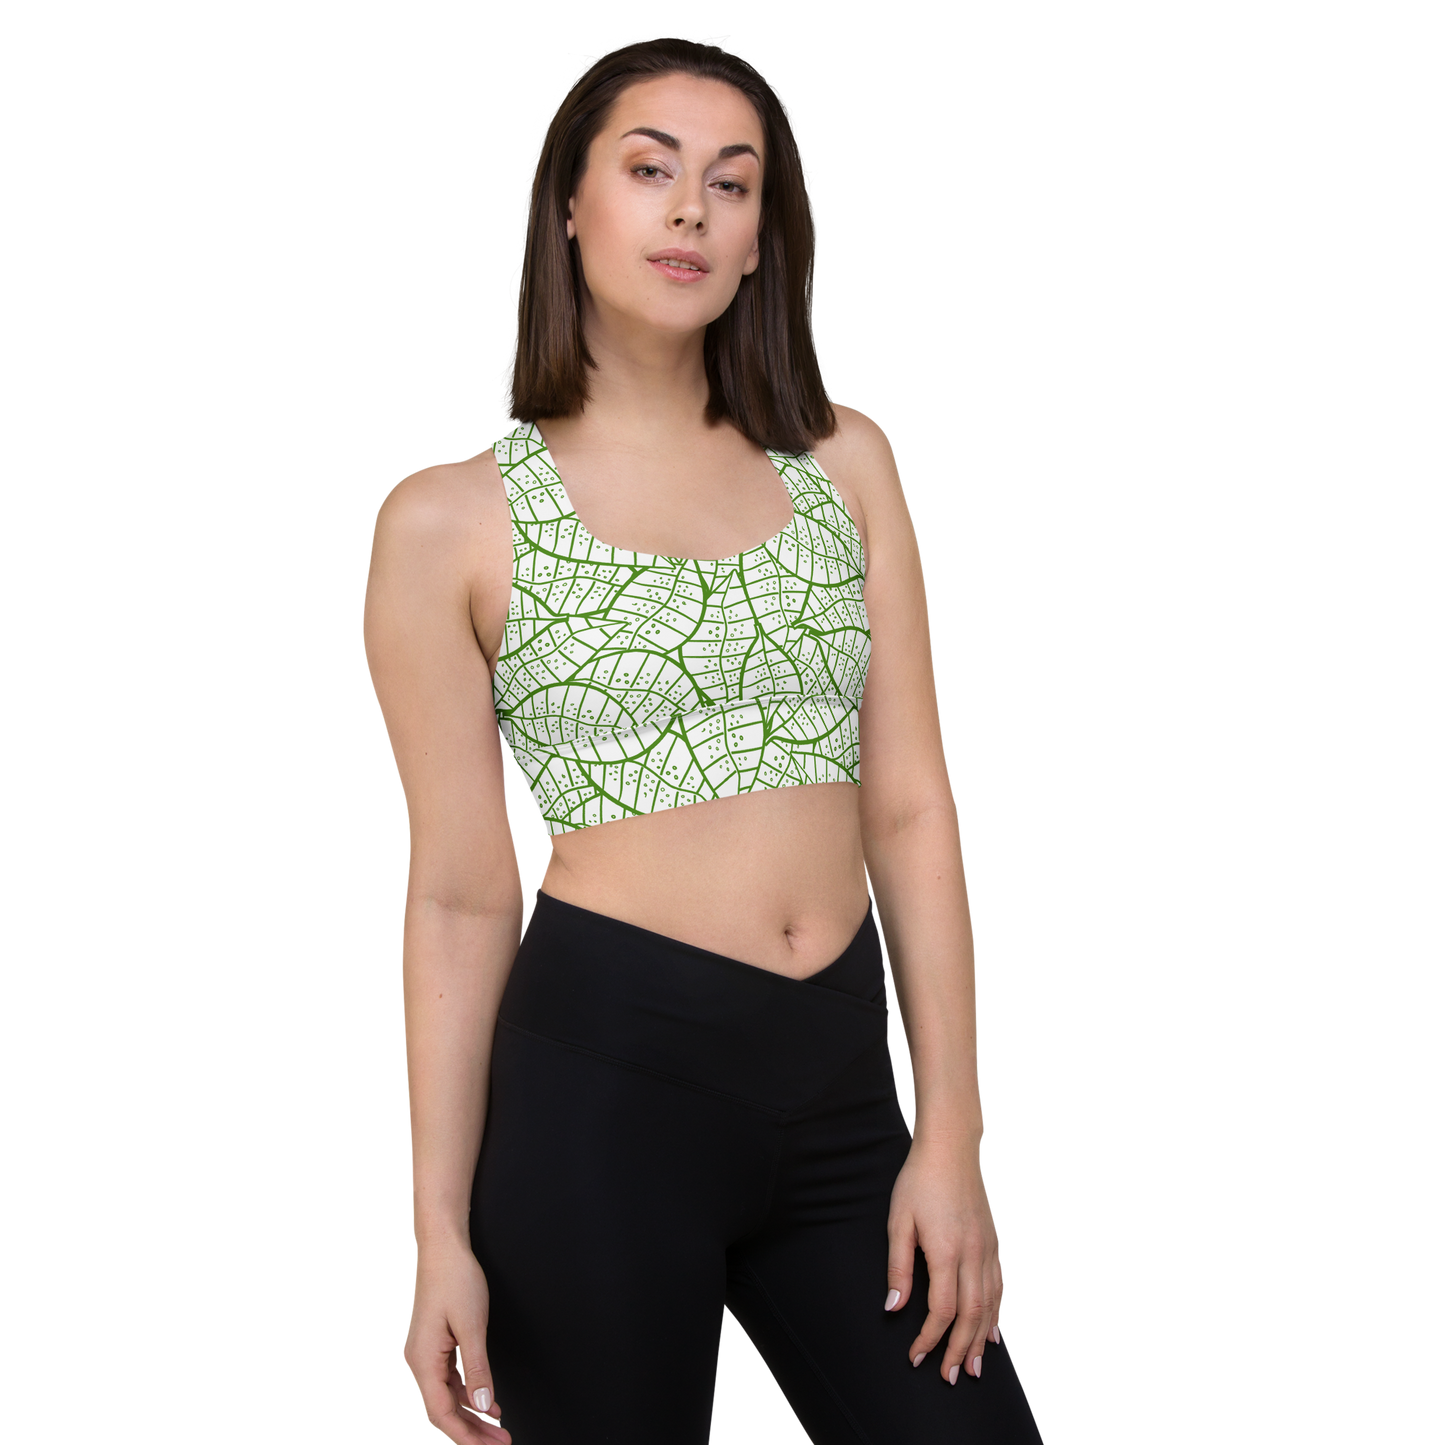 Colorful Fall Leaves | Seamless Patterns | All-Over Print Longline Sports Bra - #4